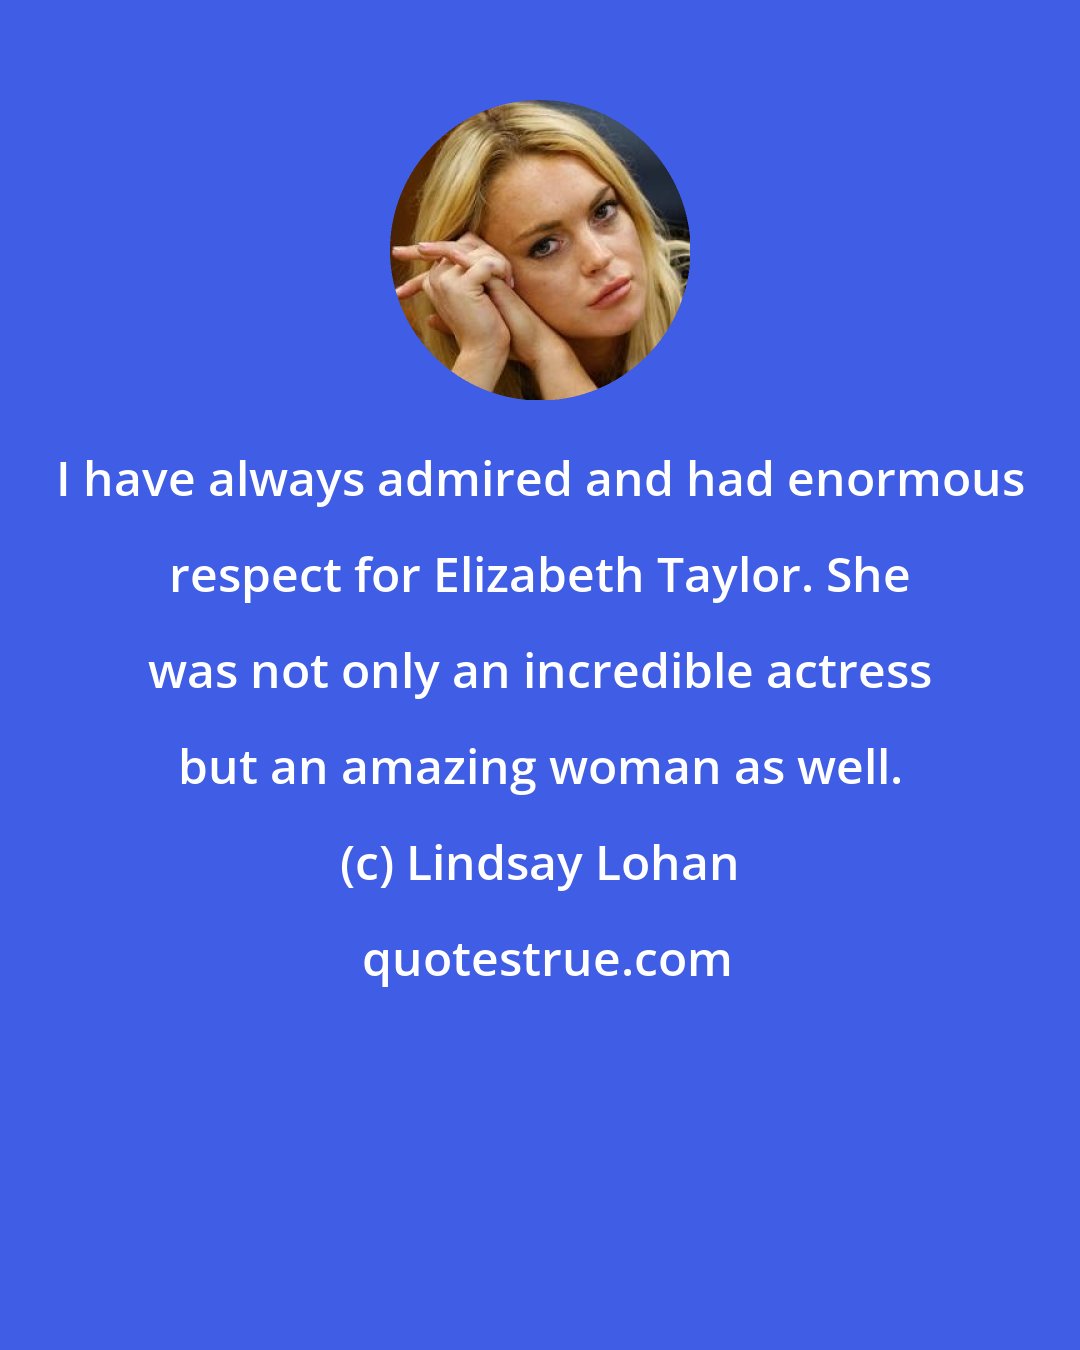 Lindsay Lohan: I have always admired and had enormous respect for Elizabeth Taylor. She was not only an incredible actress but an amazing woman as well.